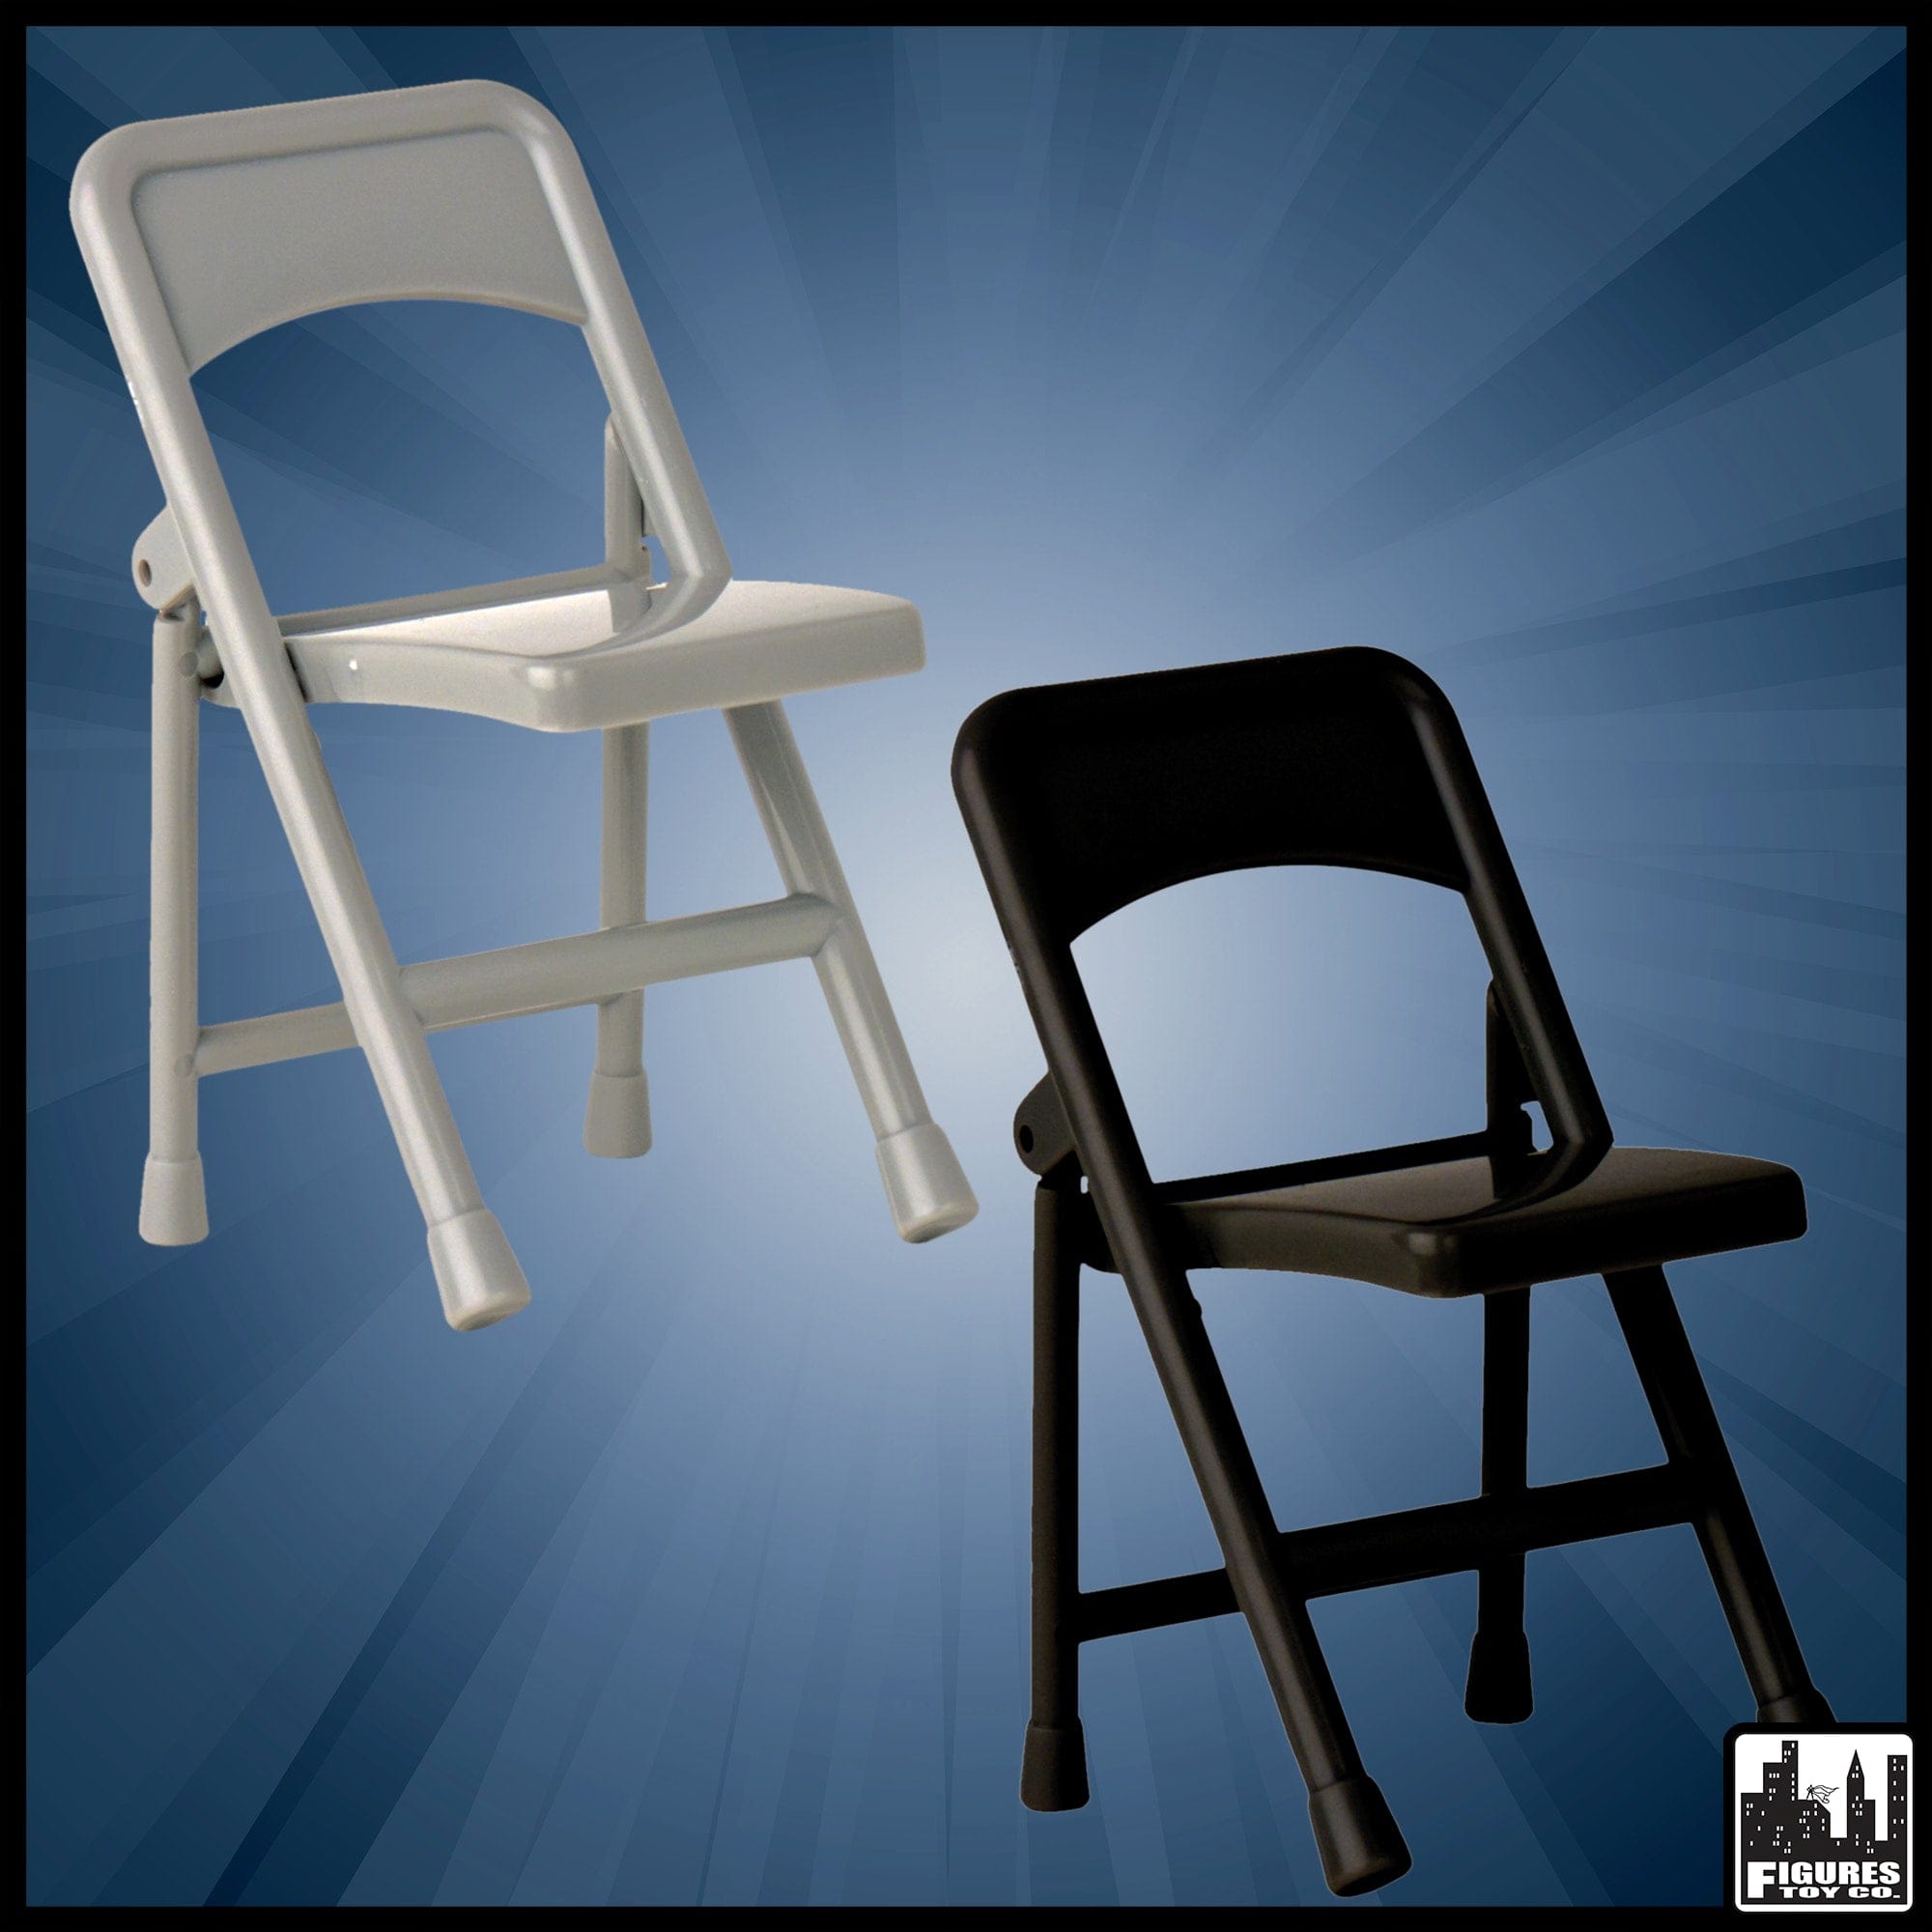 Set of 2 Folding Chairs for WWE Wrestling Action Figures: 1 Black & 1 Gray